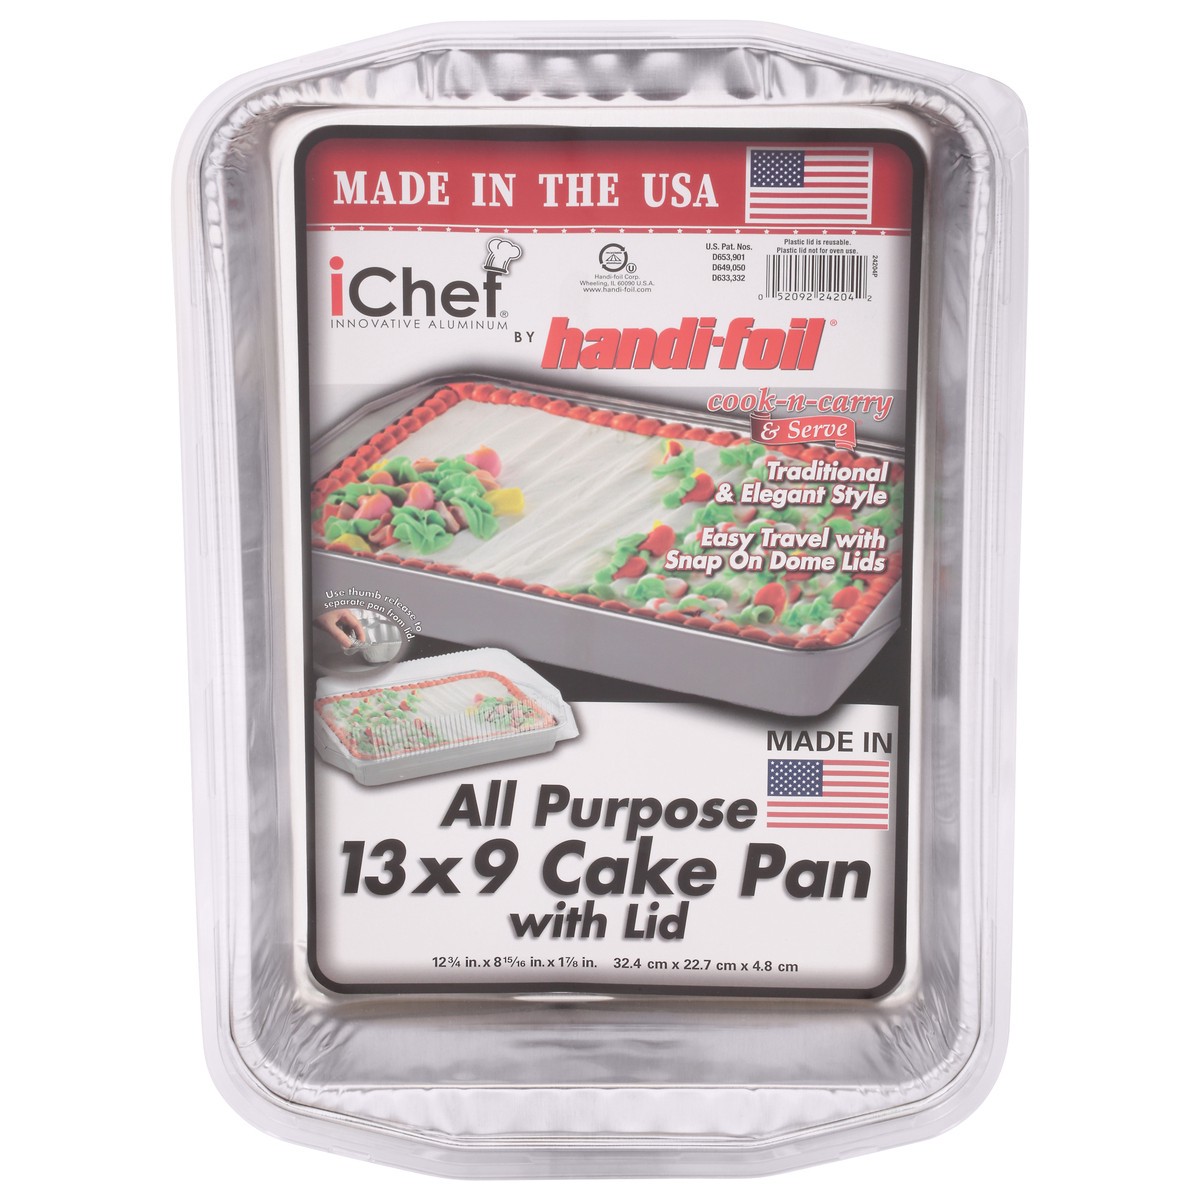 slide 1 of 9, Handi-foil iChef 13 x 9 All Purpose Cake Pan with Lid 1 ea, 1 ct